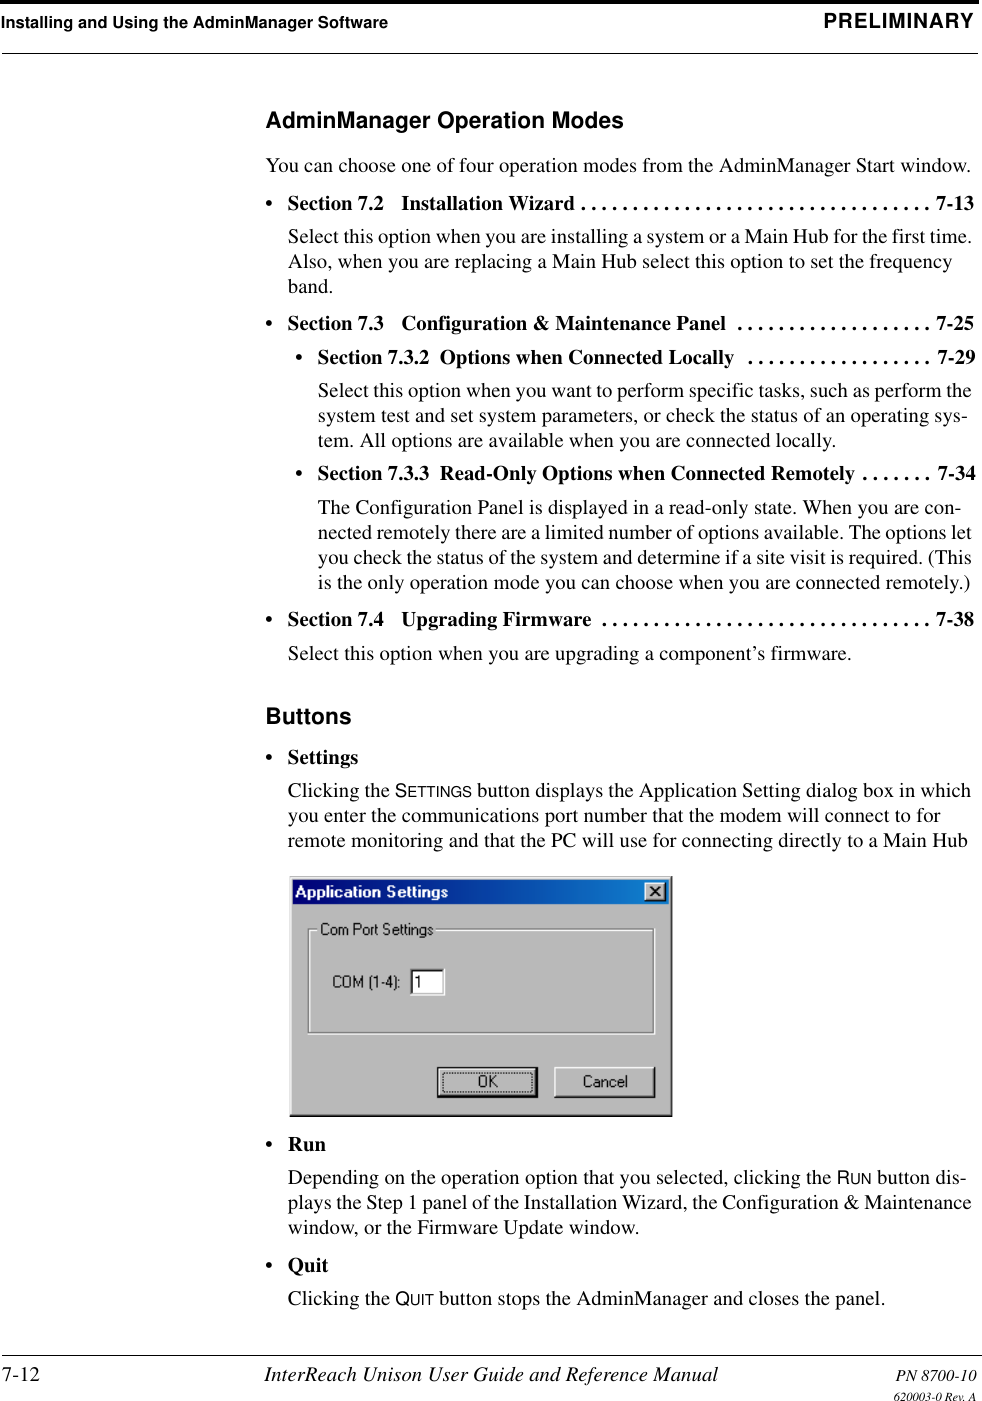 Installing and Using the AdminManager Software PRELIMINARY7-12 InterReach Unison User Guide and Reference Manual PN 8700-10620003-0 Rev. AAdminManager Operation ModesYou can choose one of four operation modes from the AdminManager Start window.• Section 7.2   Installation Wizard . . . . . . . . . . . . . . . . . . . . . . . . . . . . . . . . . . 7-13Select this option when you are installing a system or a Main Hub for the first time. Also, when you are replacing a Main Hub select this option to set the frequency band.• Section 7.3   Configuration &amp; Maintenance Panel  . . . . . . . . . . . . . . . . . . . 7-25• Section 7.3.2  Options when Connected Locally  . . . . . . . . . . . . . . . . . . 7-29Select this option when you want to perform specific tasks, such as perform the system test and set system parameters, or check the status of an operating sys-tem. All options are available when you are connected locally.• Section 7.3.3  Read-Only Options when Connected Remotely . . . . . . . 7-34The Configuration Panel is displayed in a read-only state. When you are con-nected remotely there are a limited number of options available. The options let you check the status of the system and determine if a site visit is required. (This is the only operation mode you can choose when you are connected remotely.)• Section 7.4   Upgrading Firmware  . . . . . . . . . . . . . . . . . . . . . . . . . . . . . . . . 7-38Select this option when you are upgrading a component’s firmware.Buttons•SettingsClicking the SETTINGS button displays the Application Setting dialog box in which you enter the communications port number that the modem will connect to for remote monitoring and that the PC will use for connecting directly to a Main Hub•RunDepending on the operation option that you selected, clicking the RUN button dis-plays the Step 1 panel of the Installation Wizard, the Configuration &amp; Maintenance window, or the Firmware Update window.•QuitClicking the QUIT button stops the AdminManager and closes the panel.